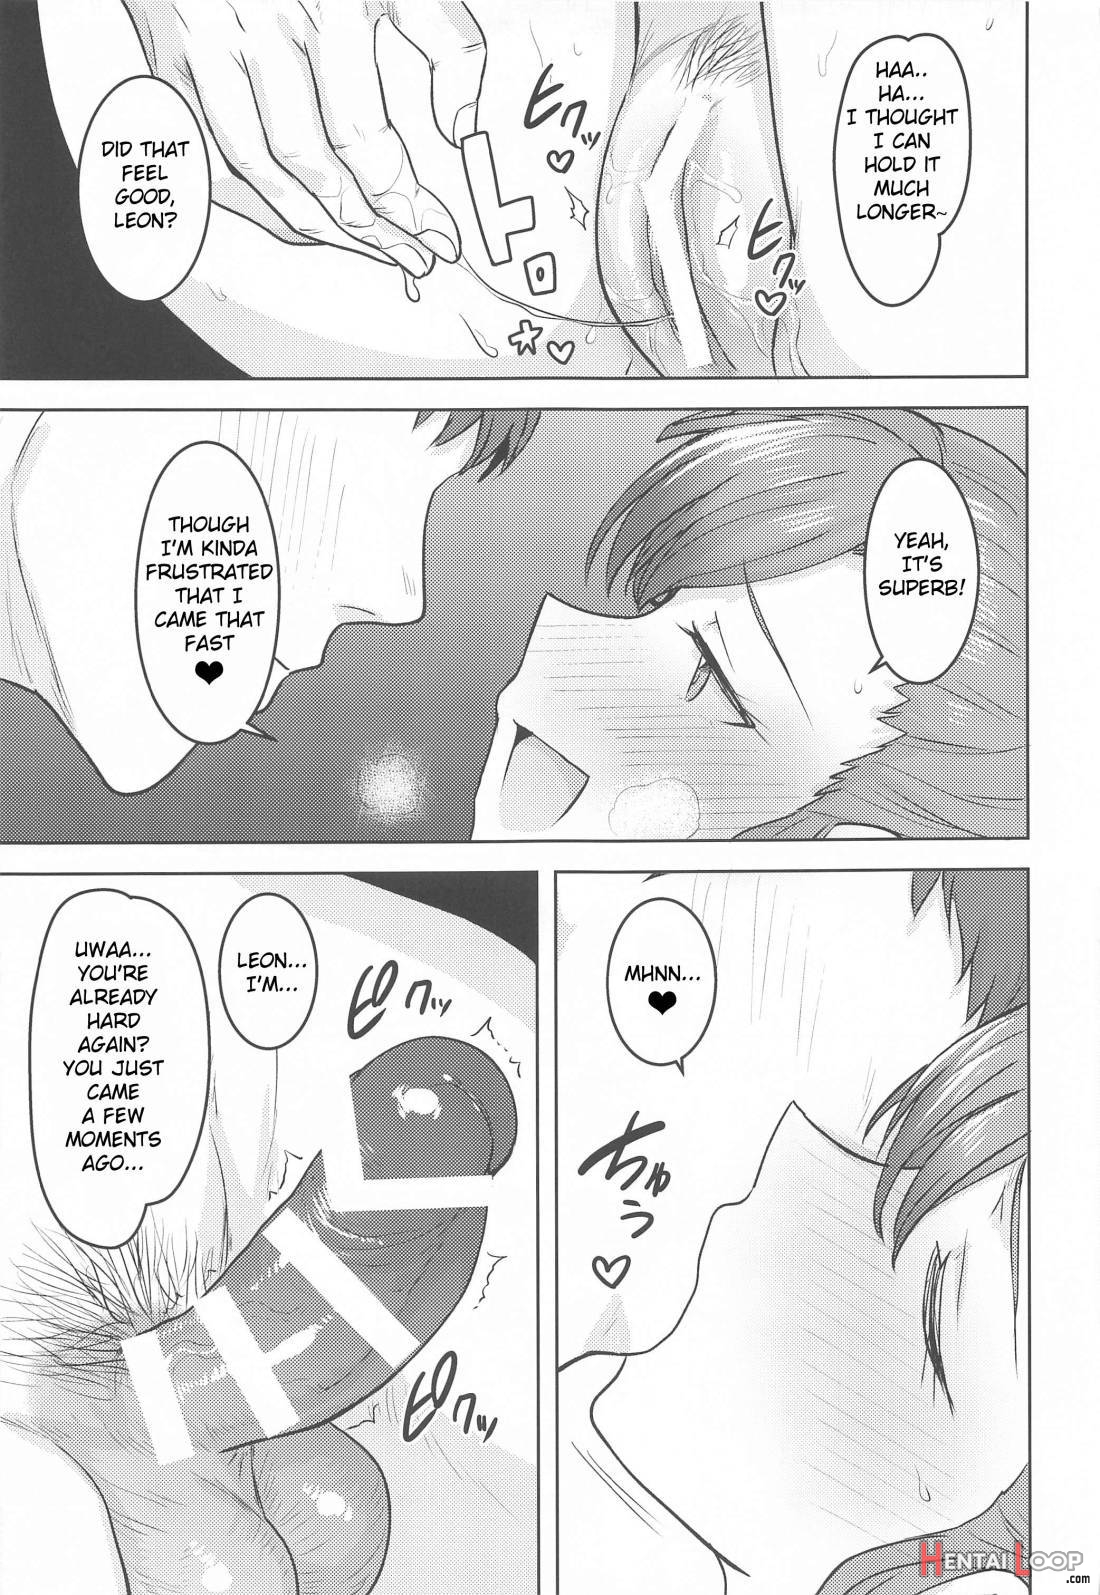 Leon To Onsen page 20